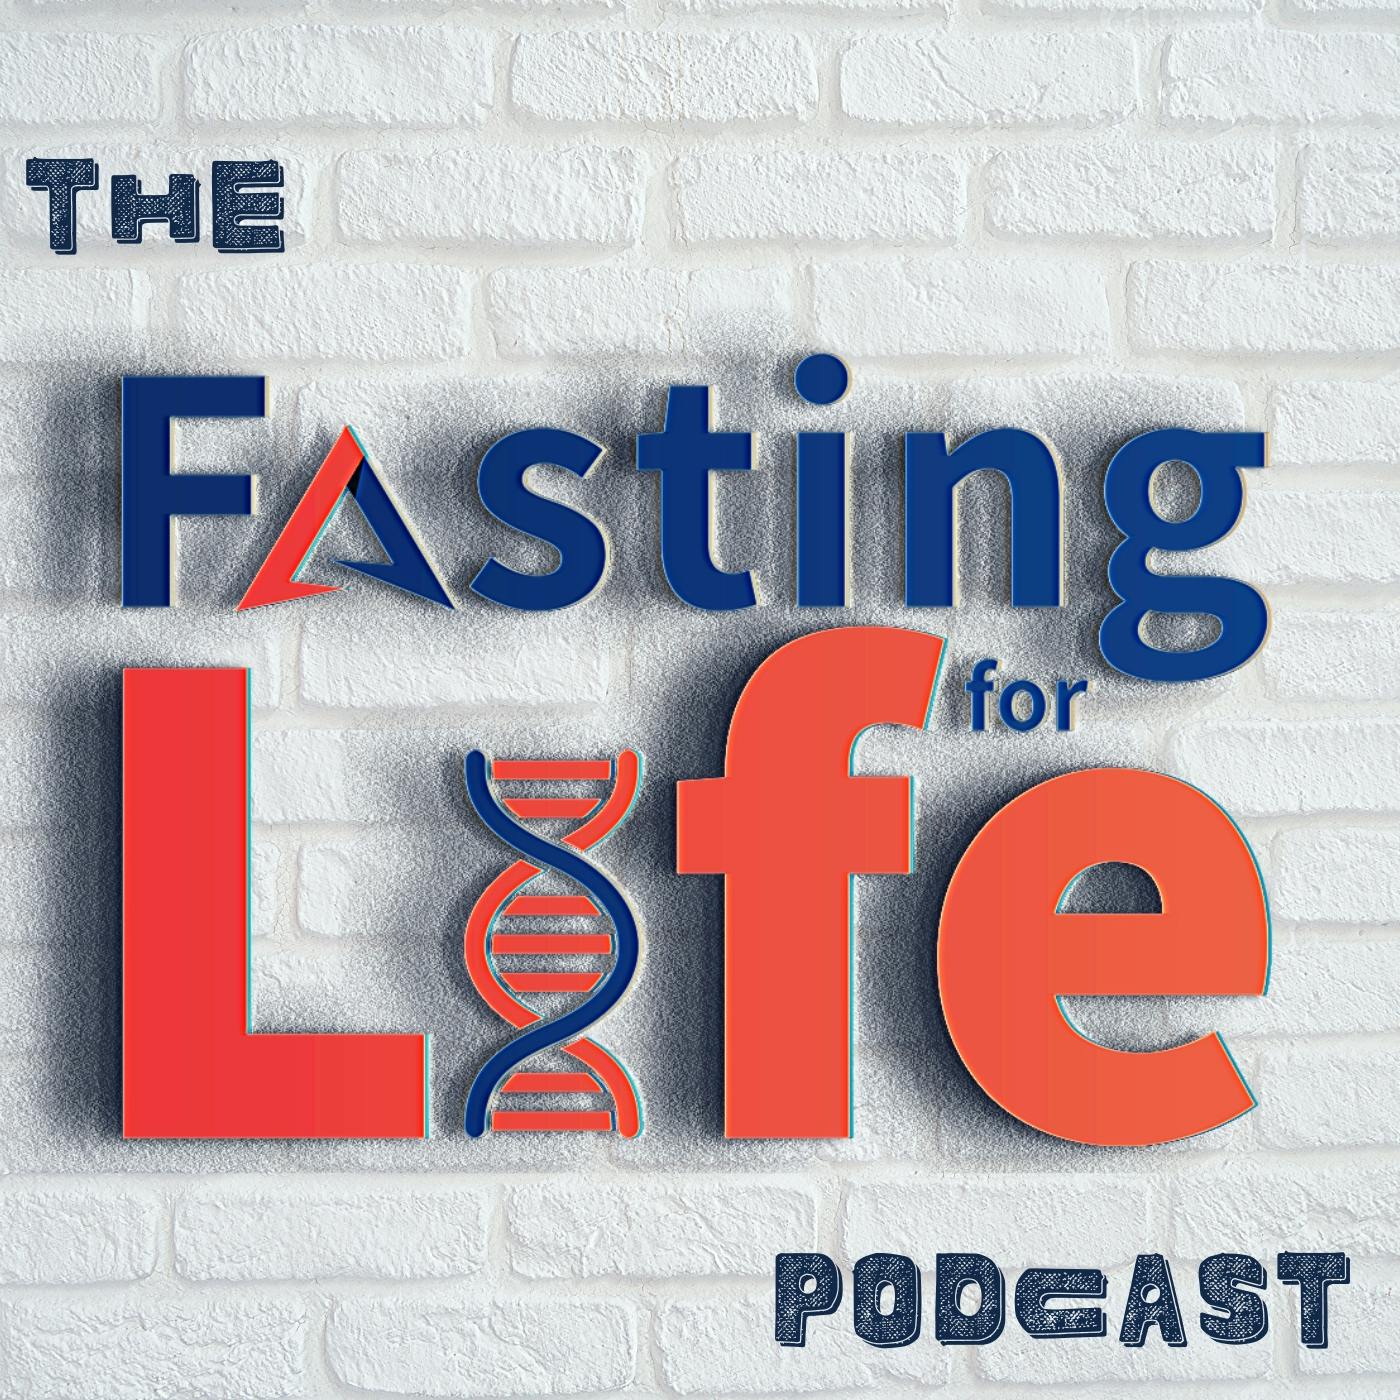 Ep. 66 - Insulin-Friendly Lifestyle for Best Fasting Results | Nutrition for Insulin Resistance, Health for the Heart, Brain, Obesity, & Infertility | Dr. Benjamin Bikman Research & Low Calorie, Low C